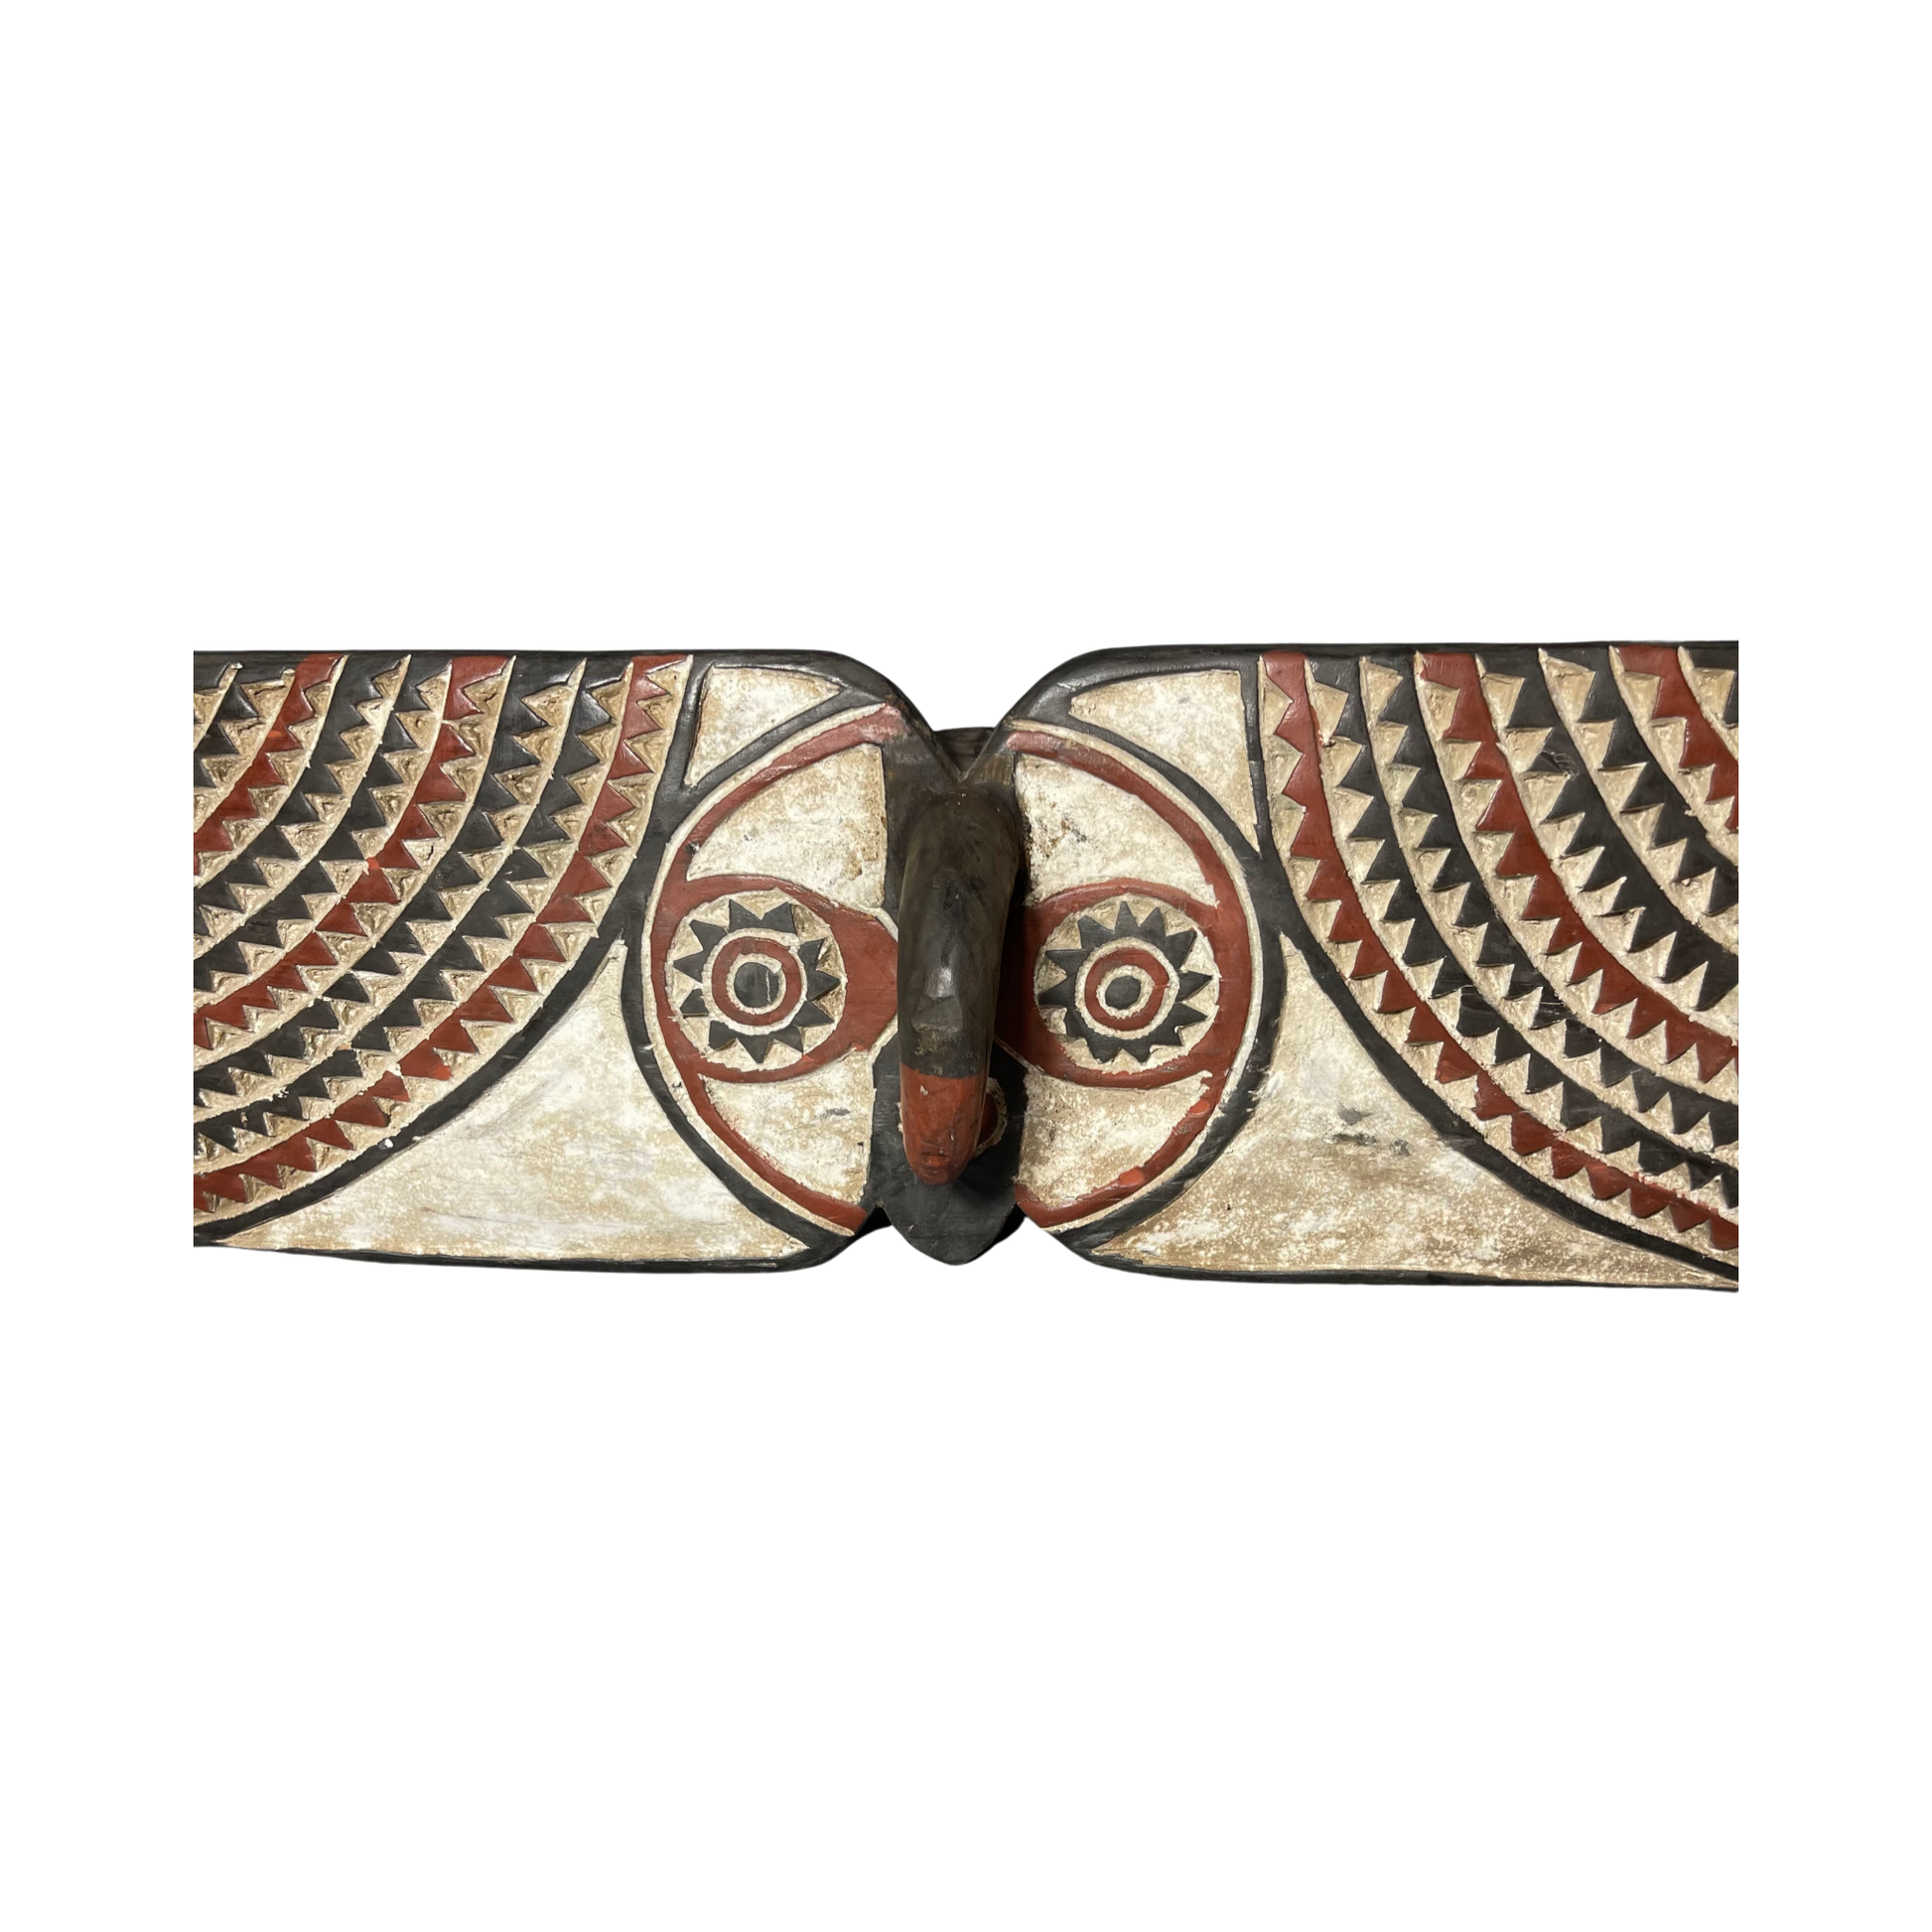 Butterfly Mask - MD African Art